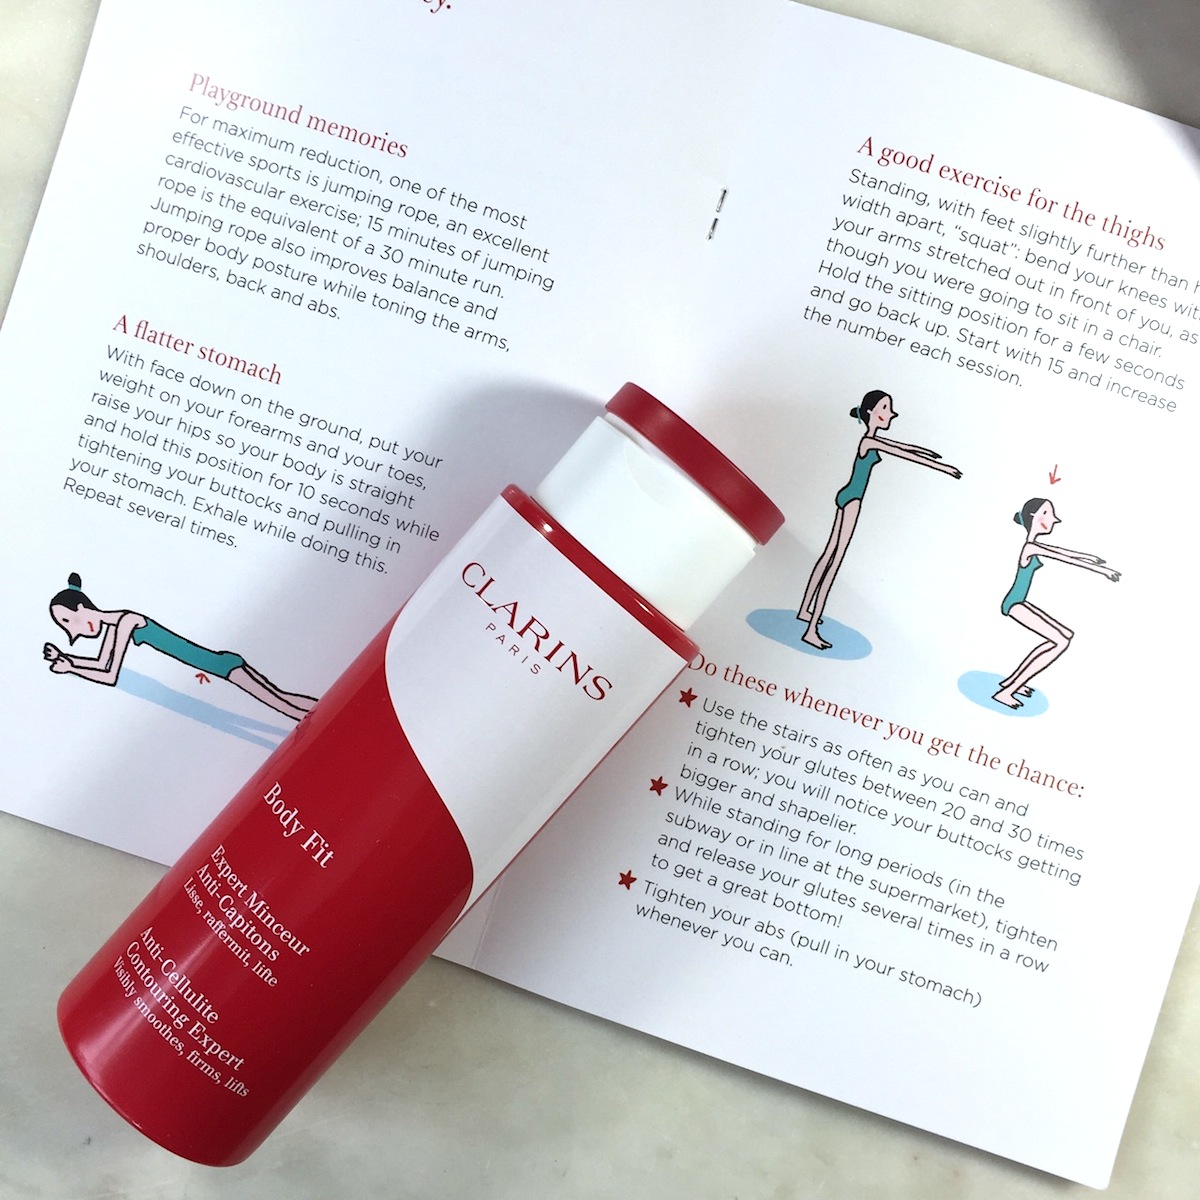 Clarins Body Fit Anti-Cellulite Contouring Expert: A quick review